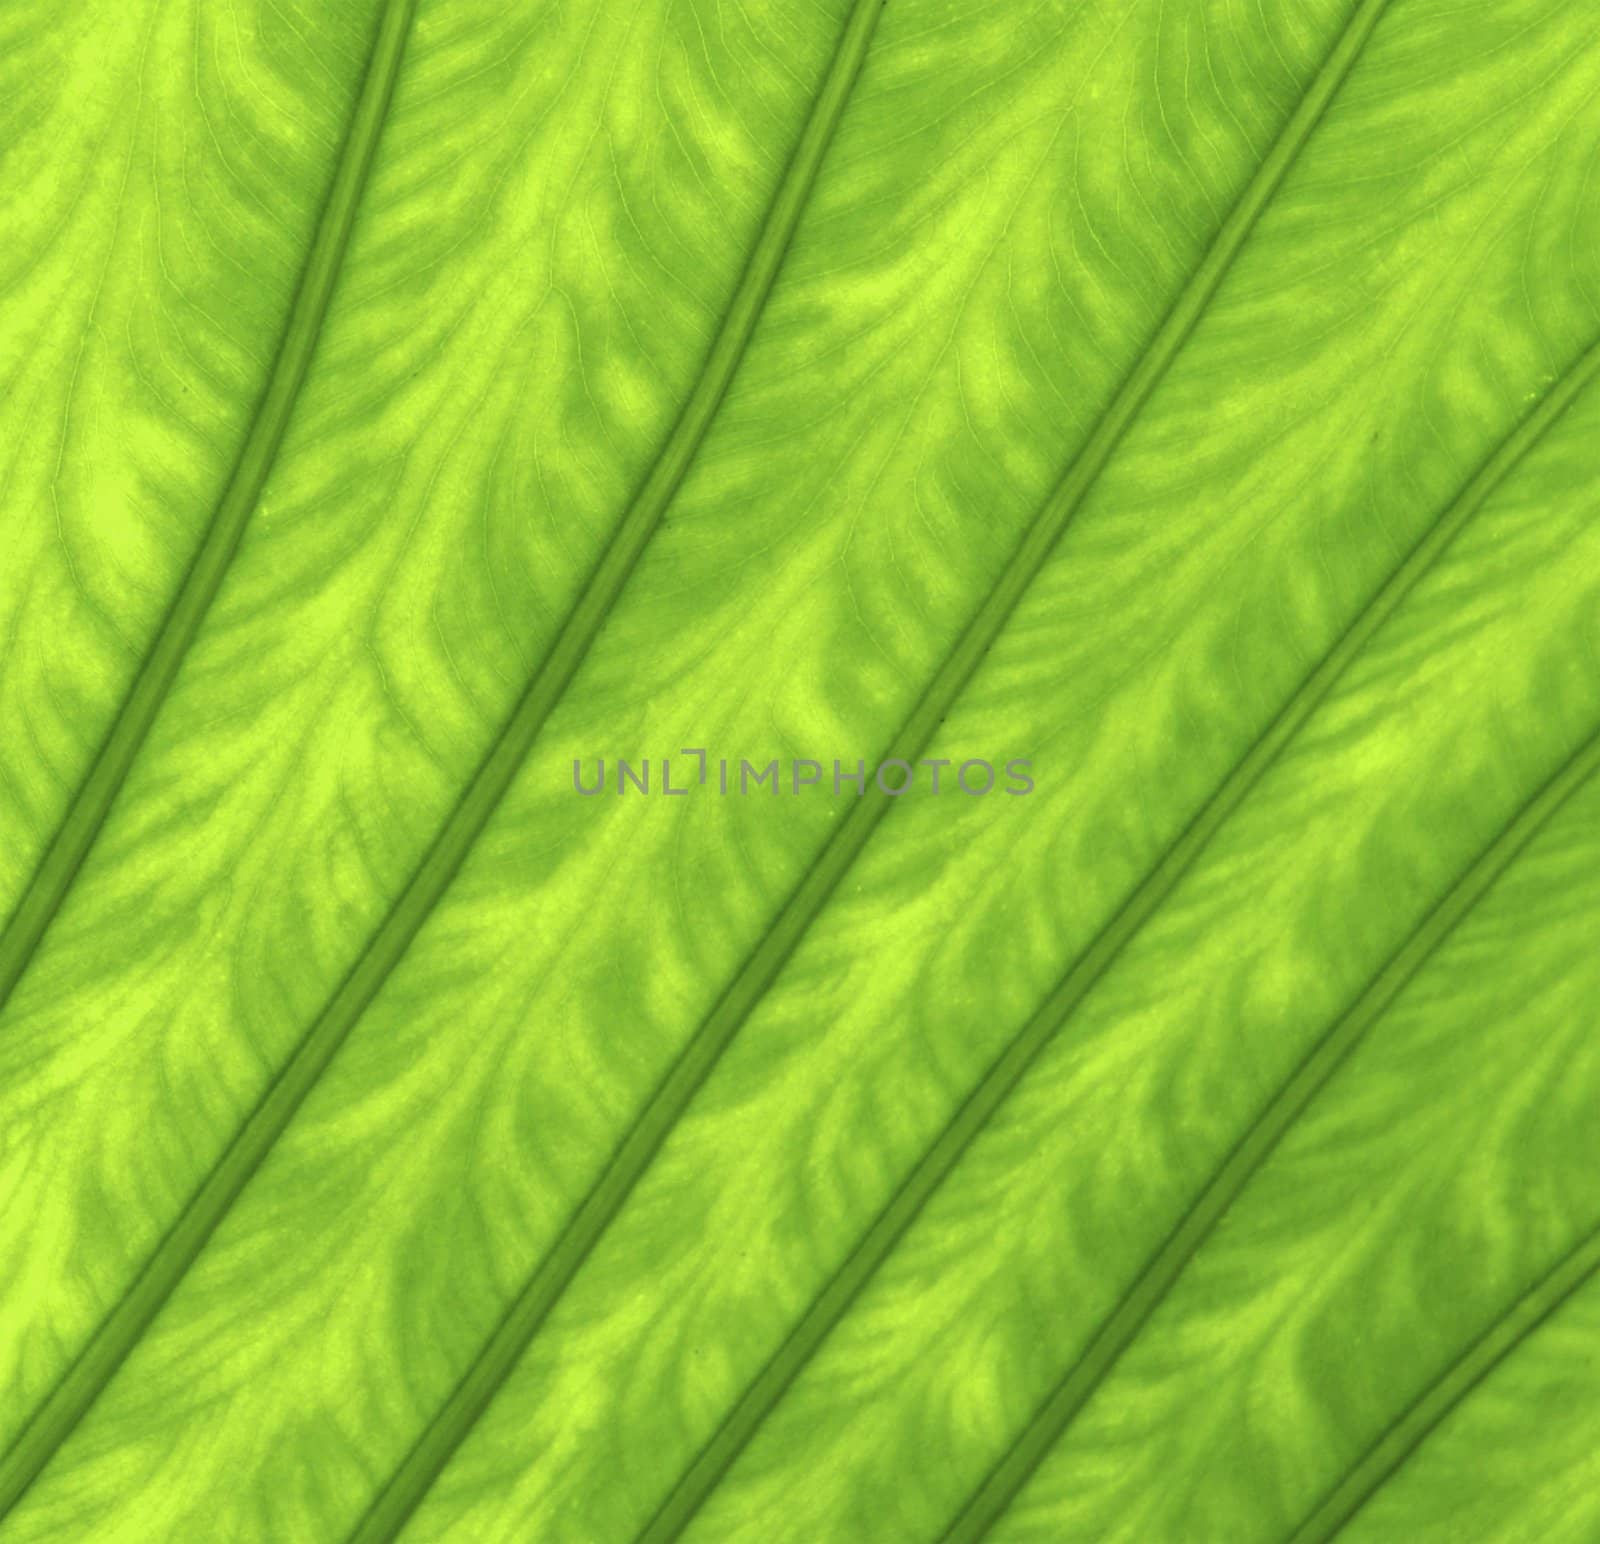 Texture of a green leaf as background by ozaiachin